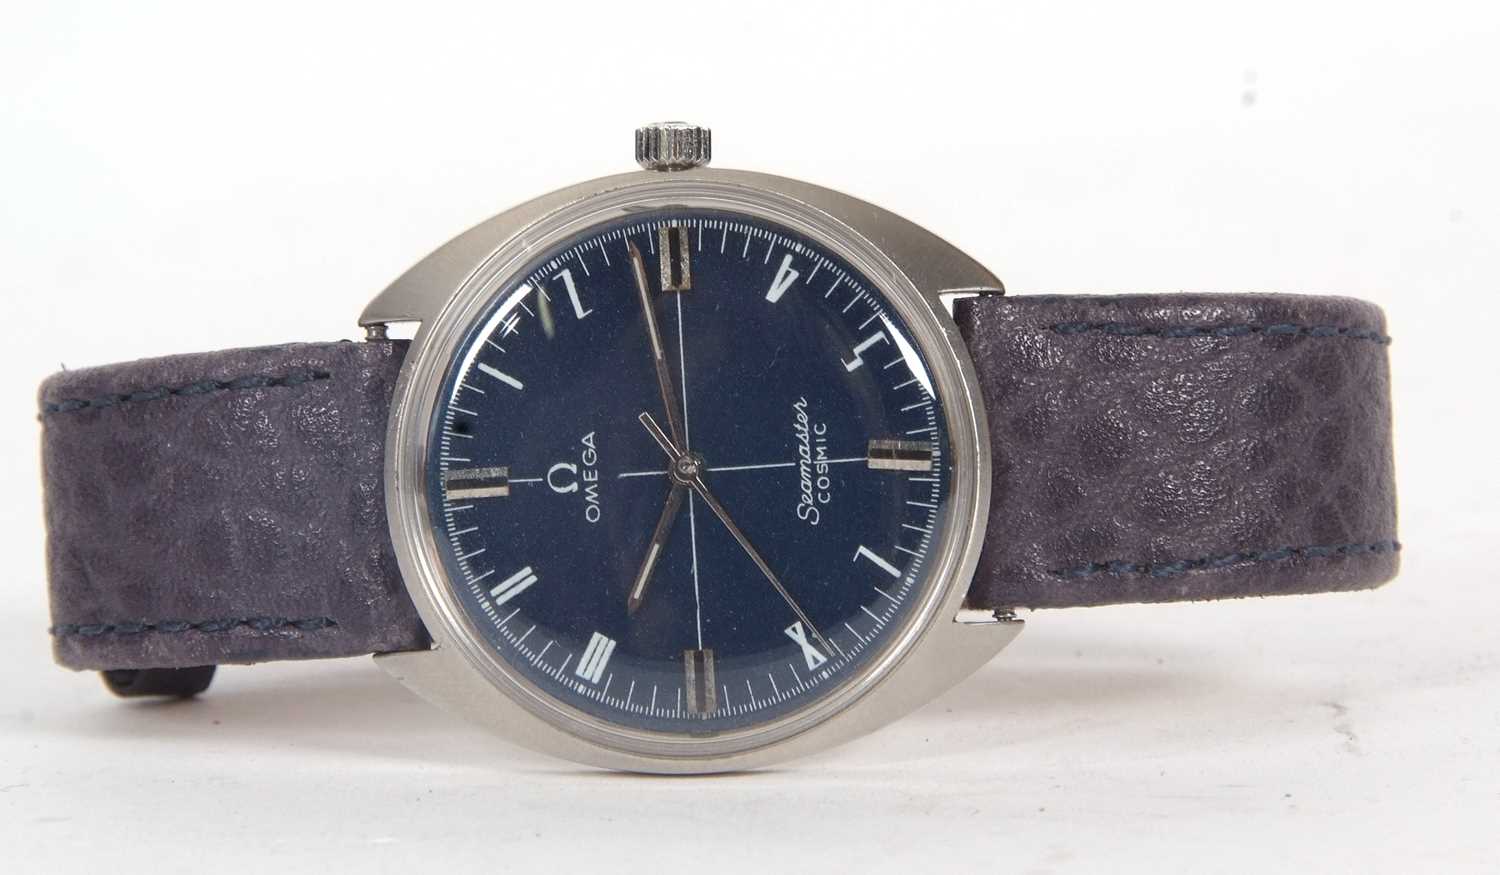 An Omega Seamaster Cosmic gents wristwatch, the watch has a manually crown wound movement and